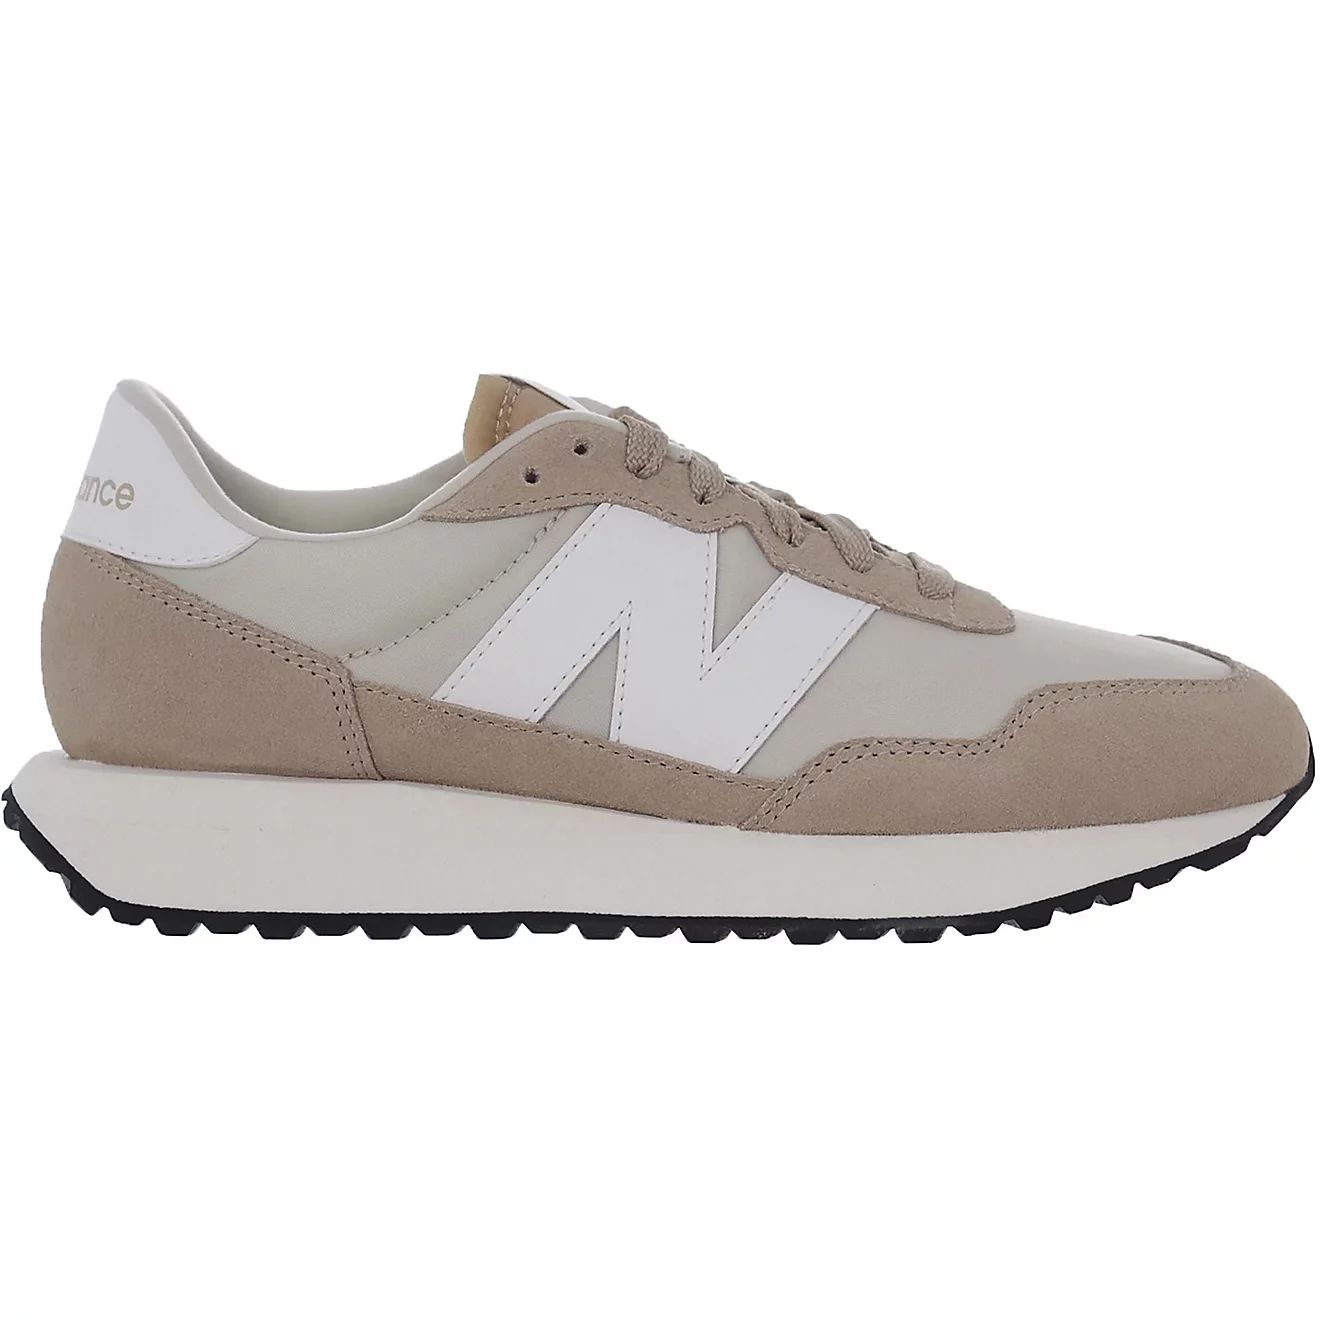 New Balance Women's 237 Retro Sneaker | Free Shipping at Academy | Academy Sports + Outdoors